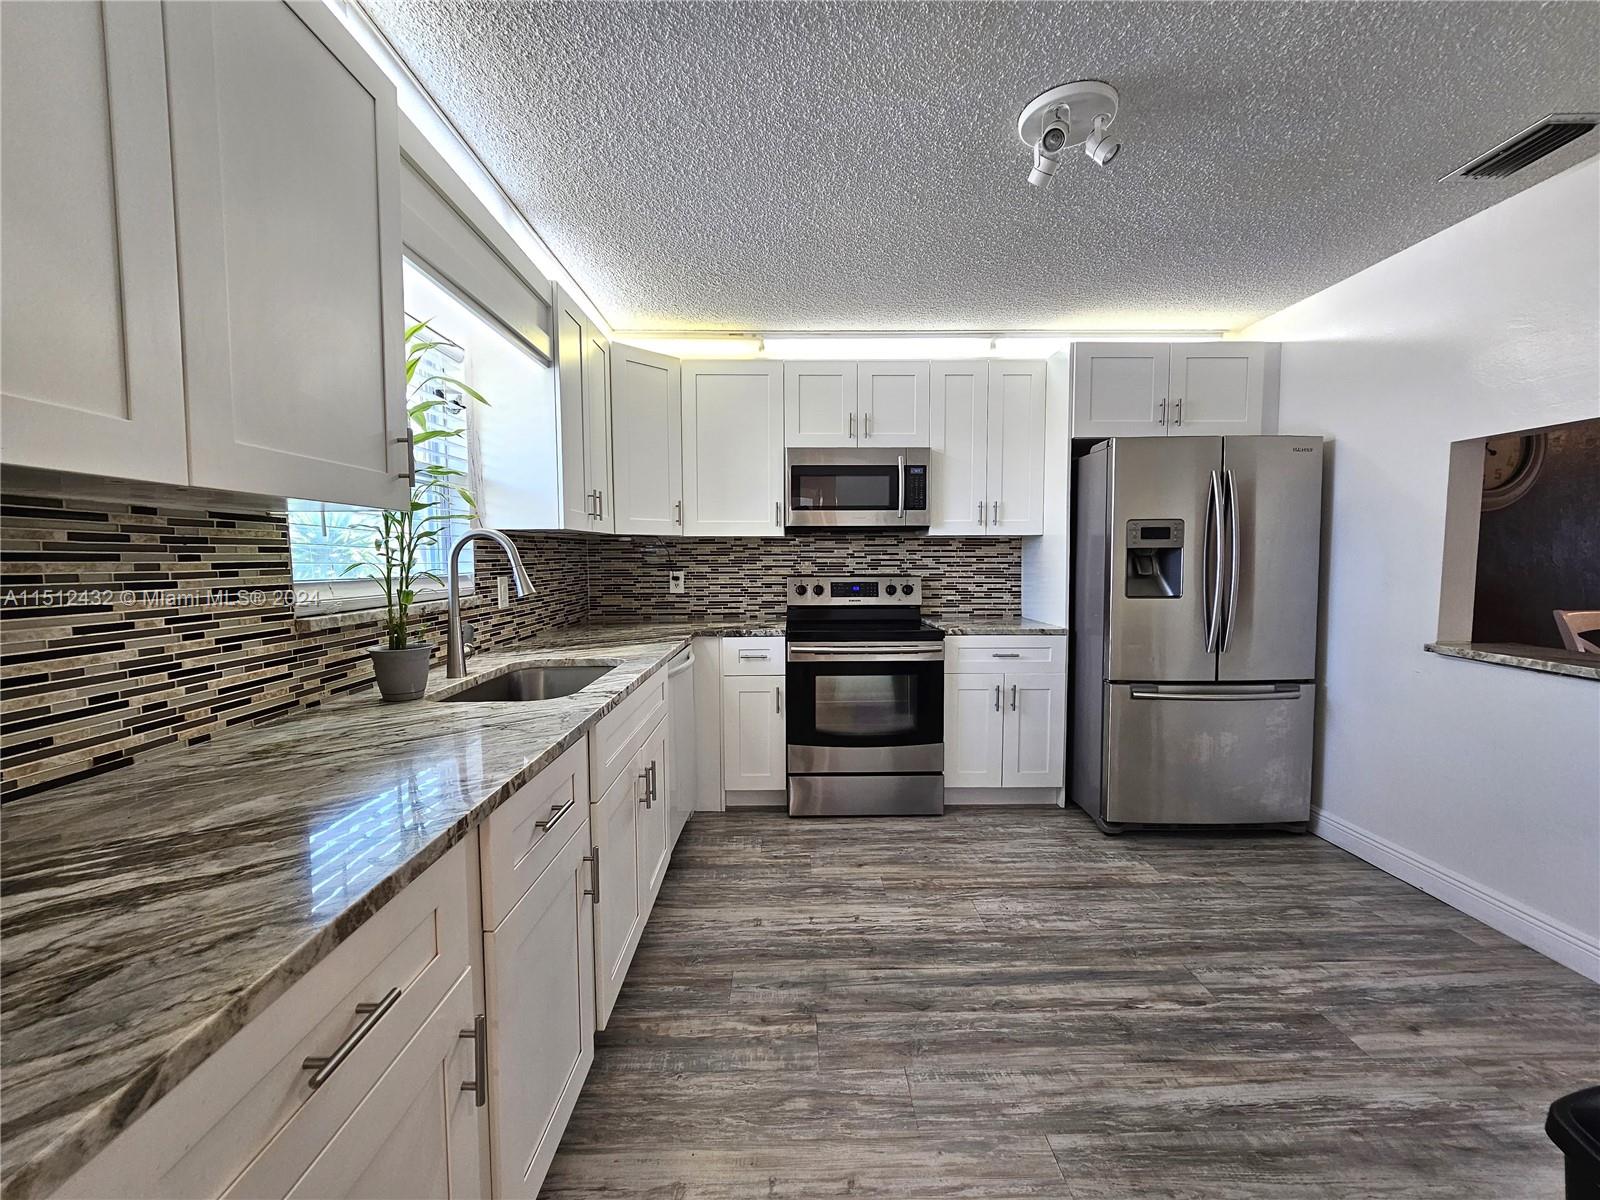 a large kitchen with cabinets stainless steel appliances a sink and a window